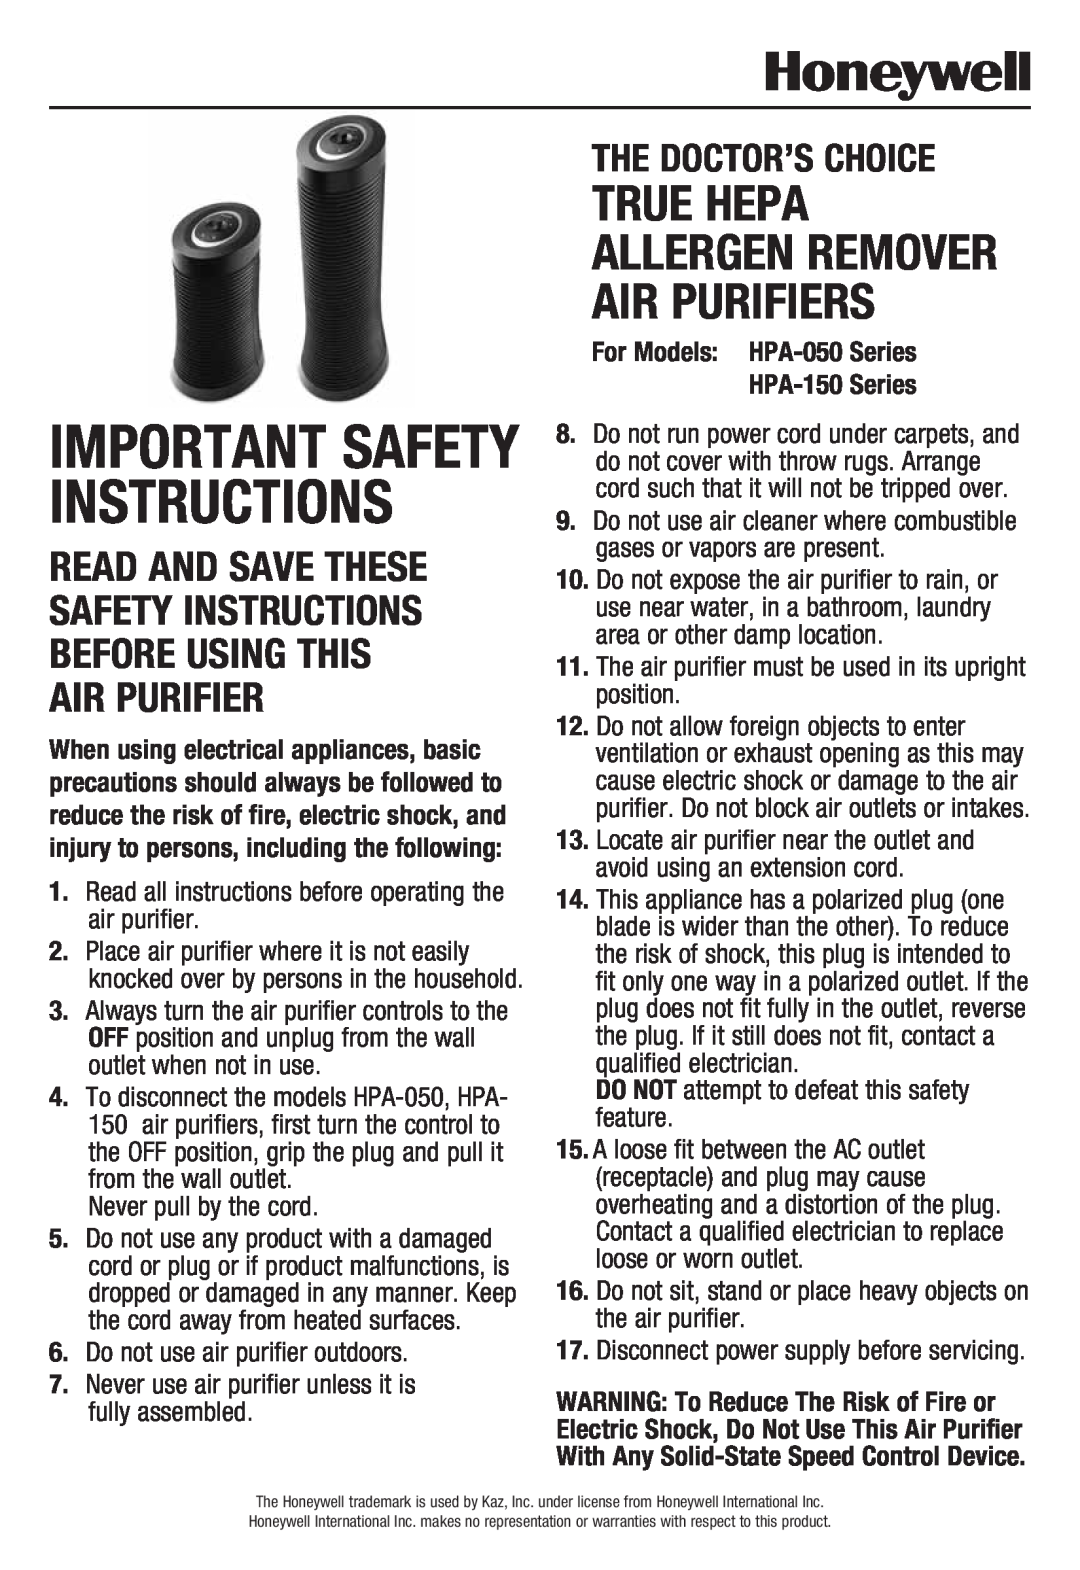 Honeywell HPA050 important safety instructions For Models HPA-050Series HPA-150Series, Important Safety Instructions 